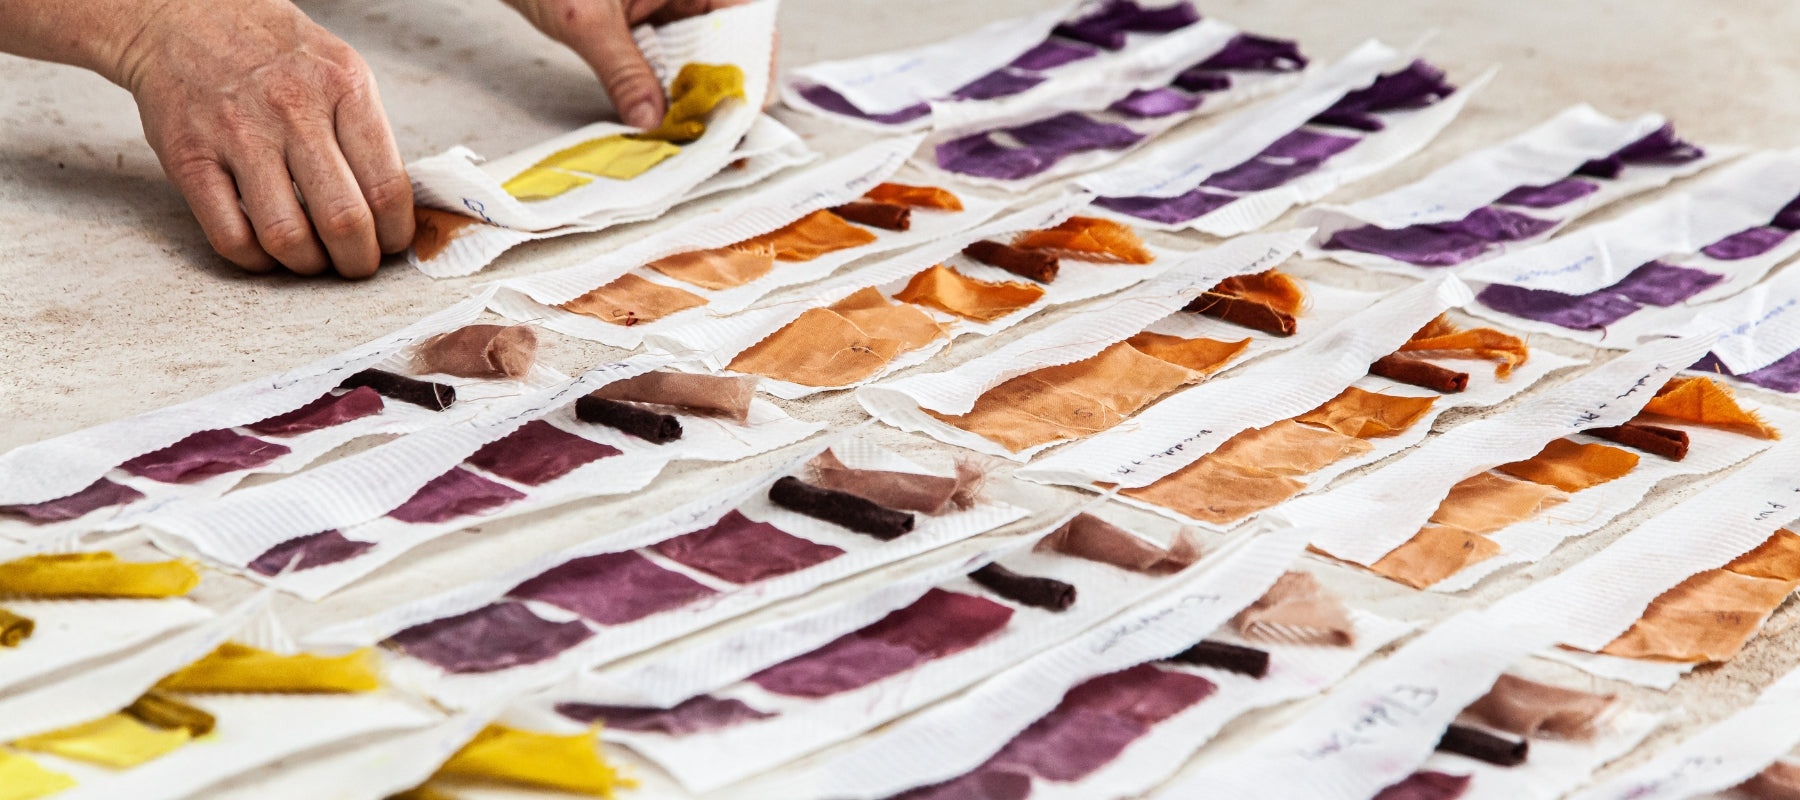 The art of making natural dyes